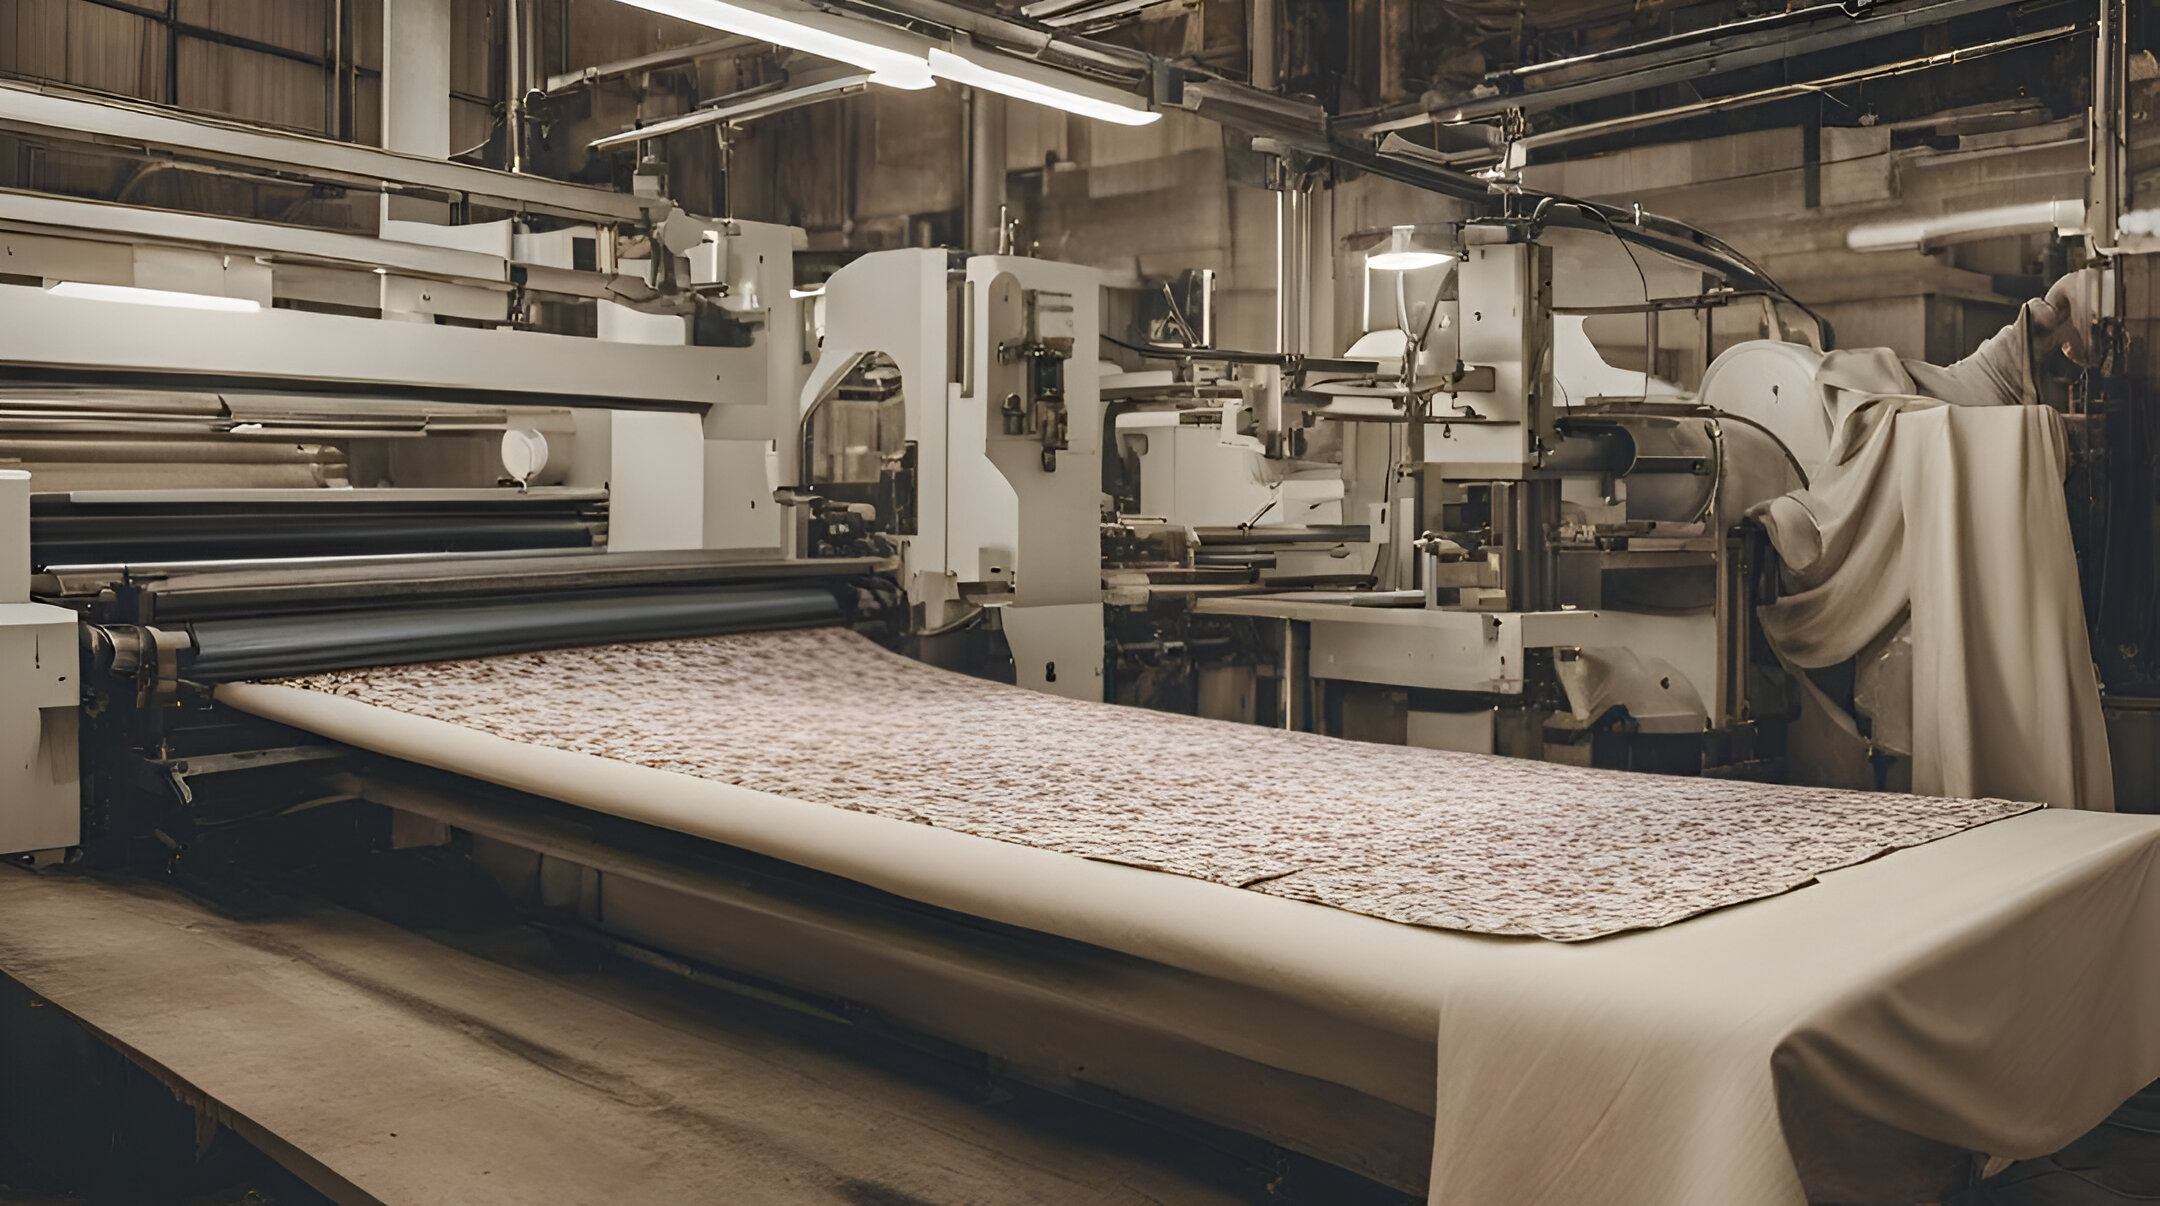 [Industrial textile printing machine processing floral patterned fabric in a factory setting]-[fabricpitara]